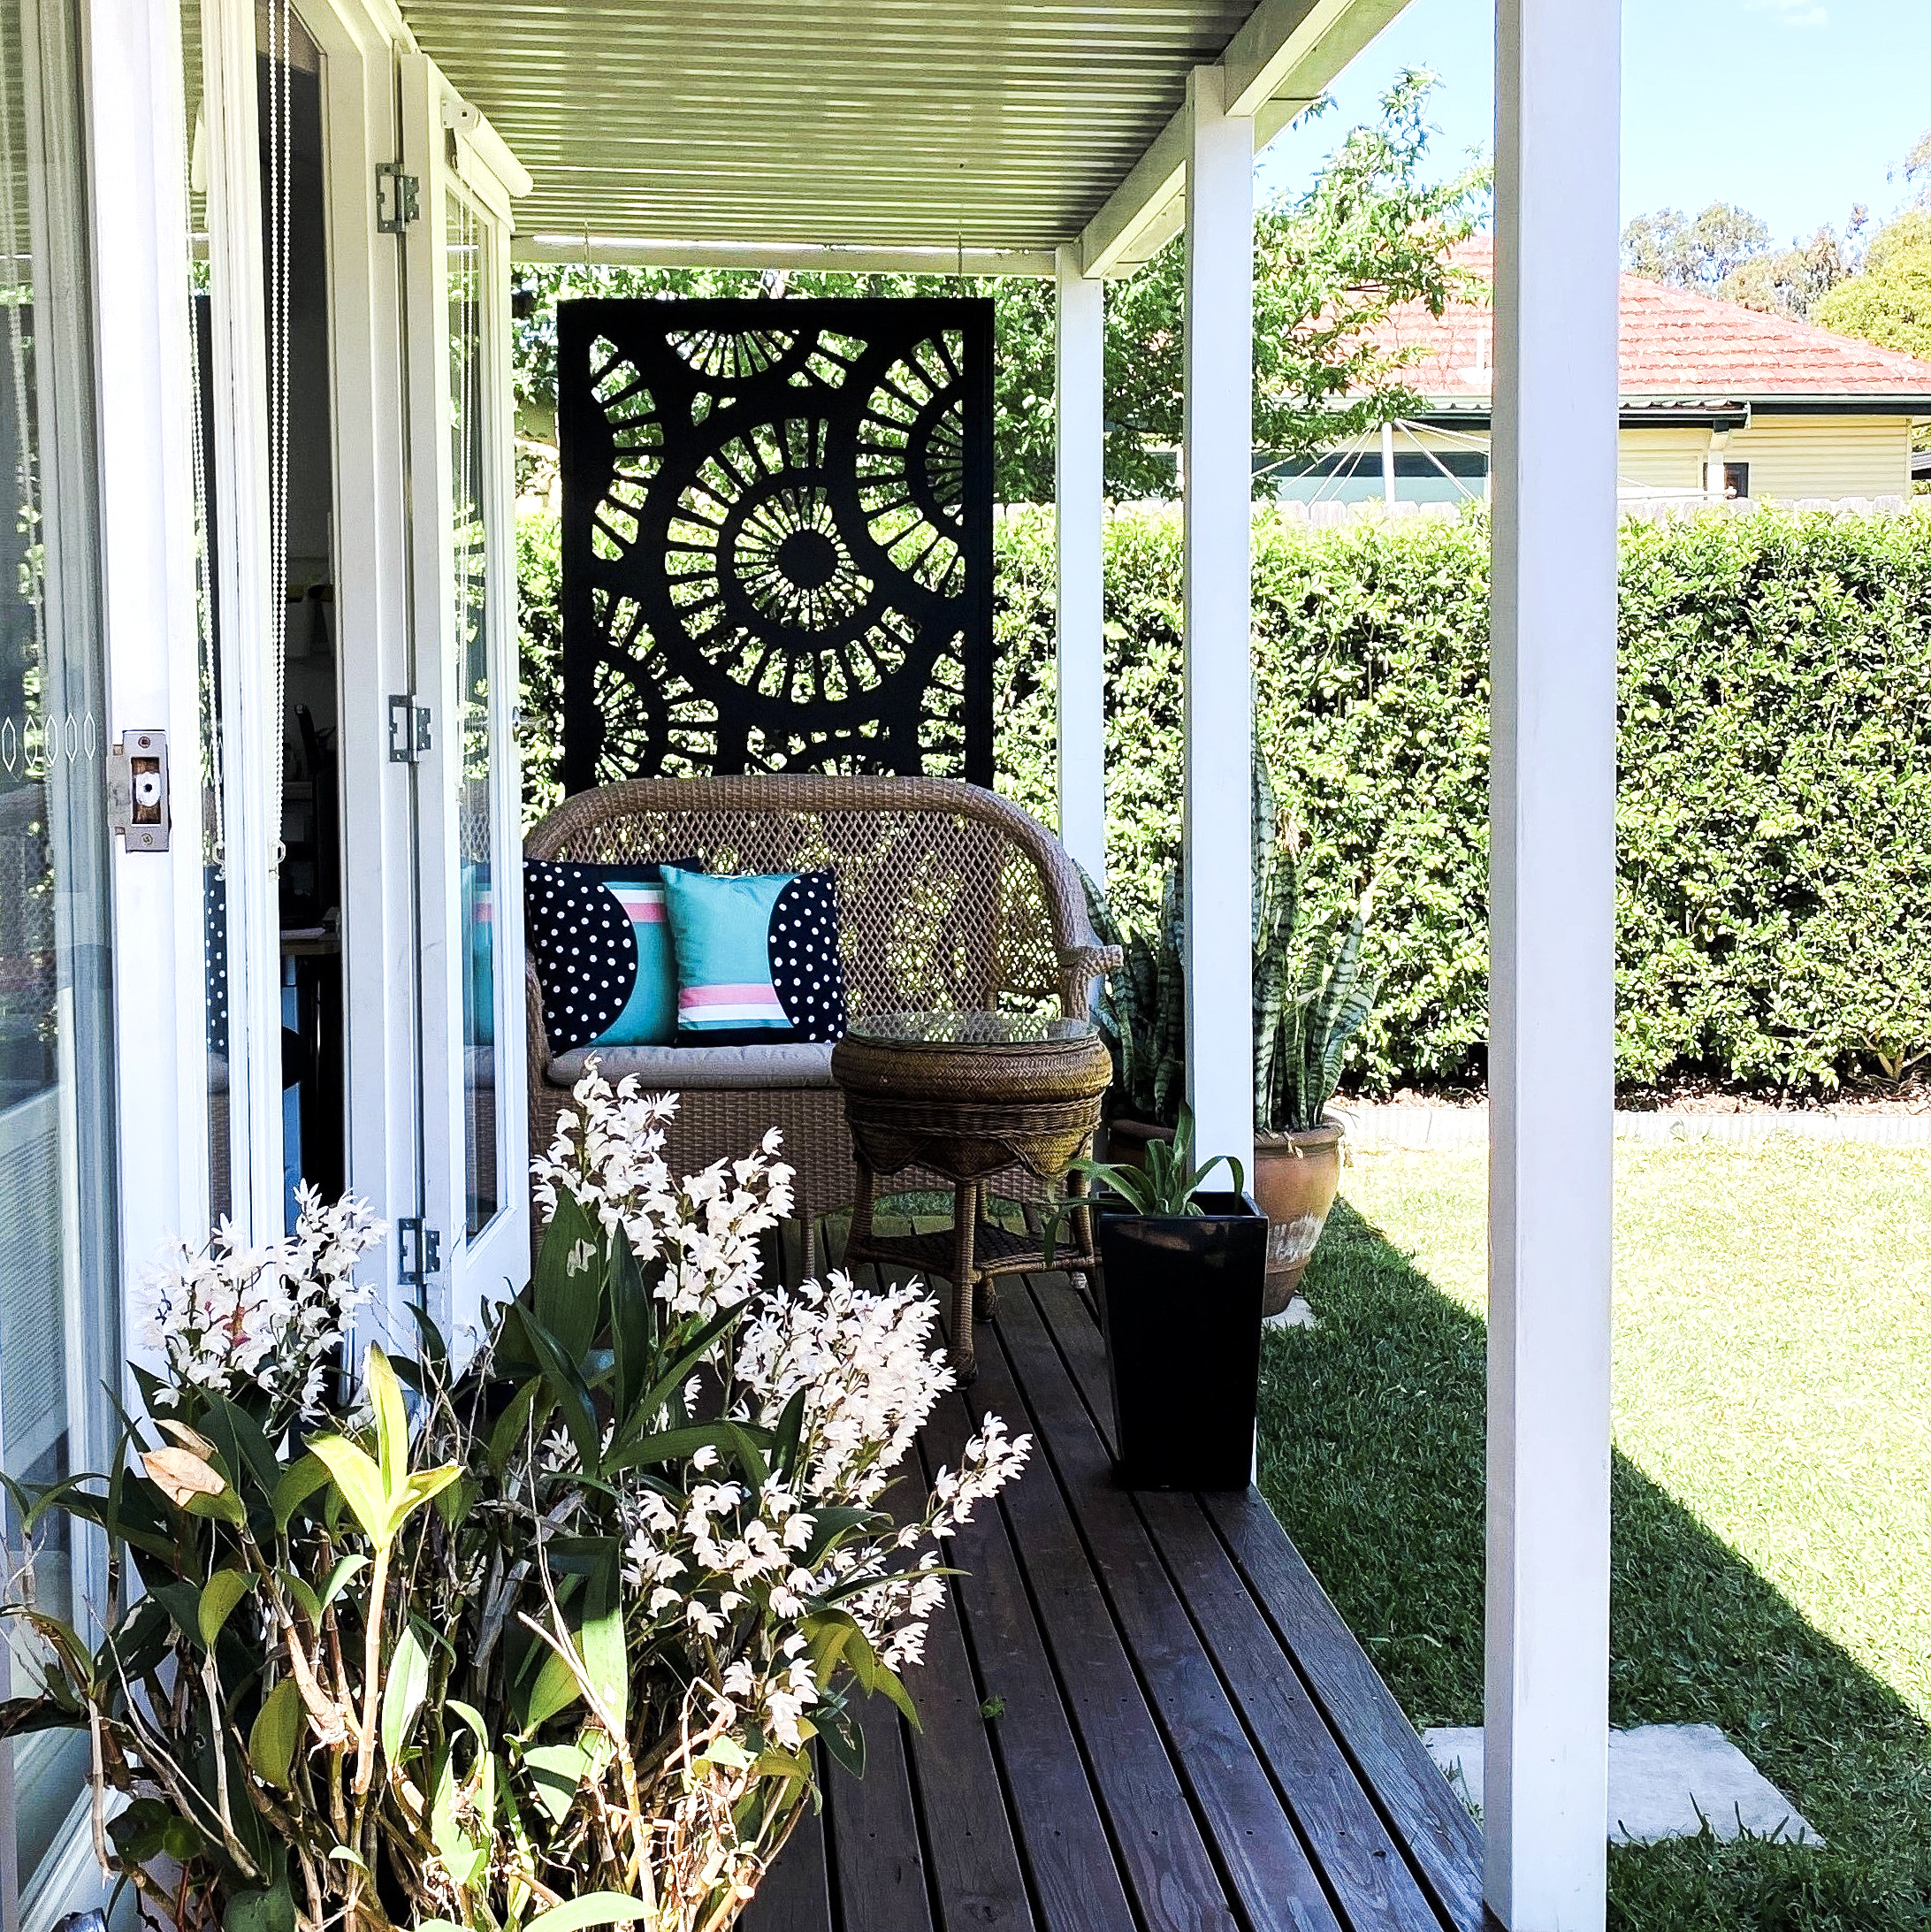 Verandah  with chair and flowers